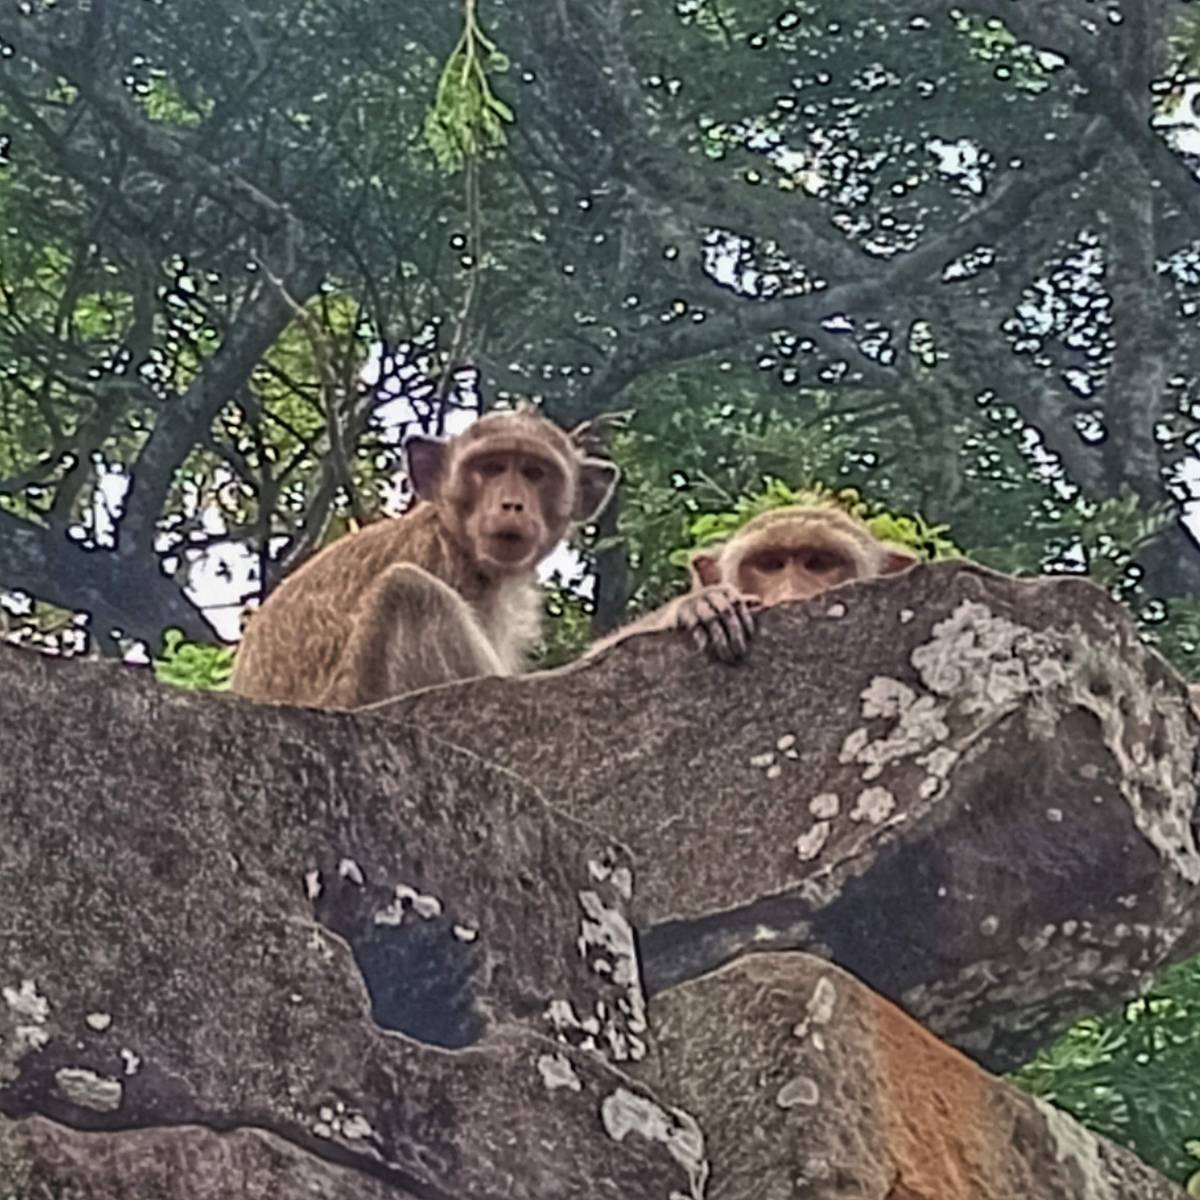 No Monkey Business Going on at Angkor Thom